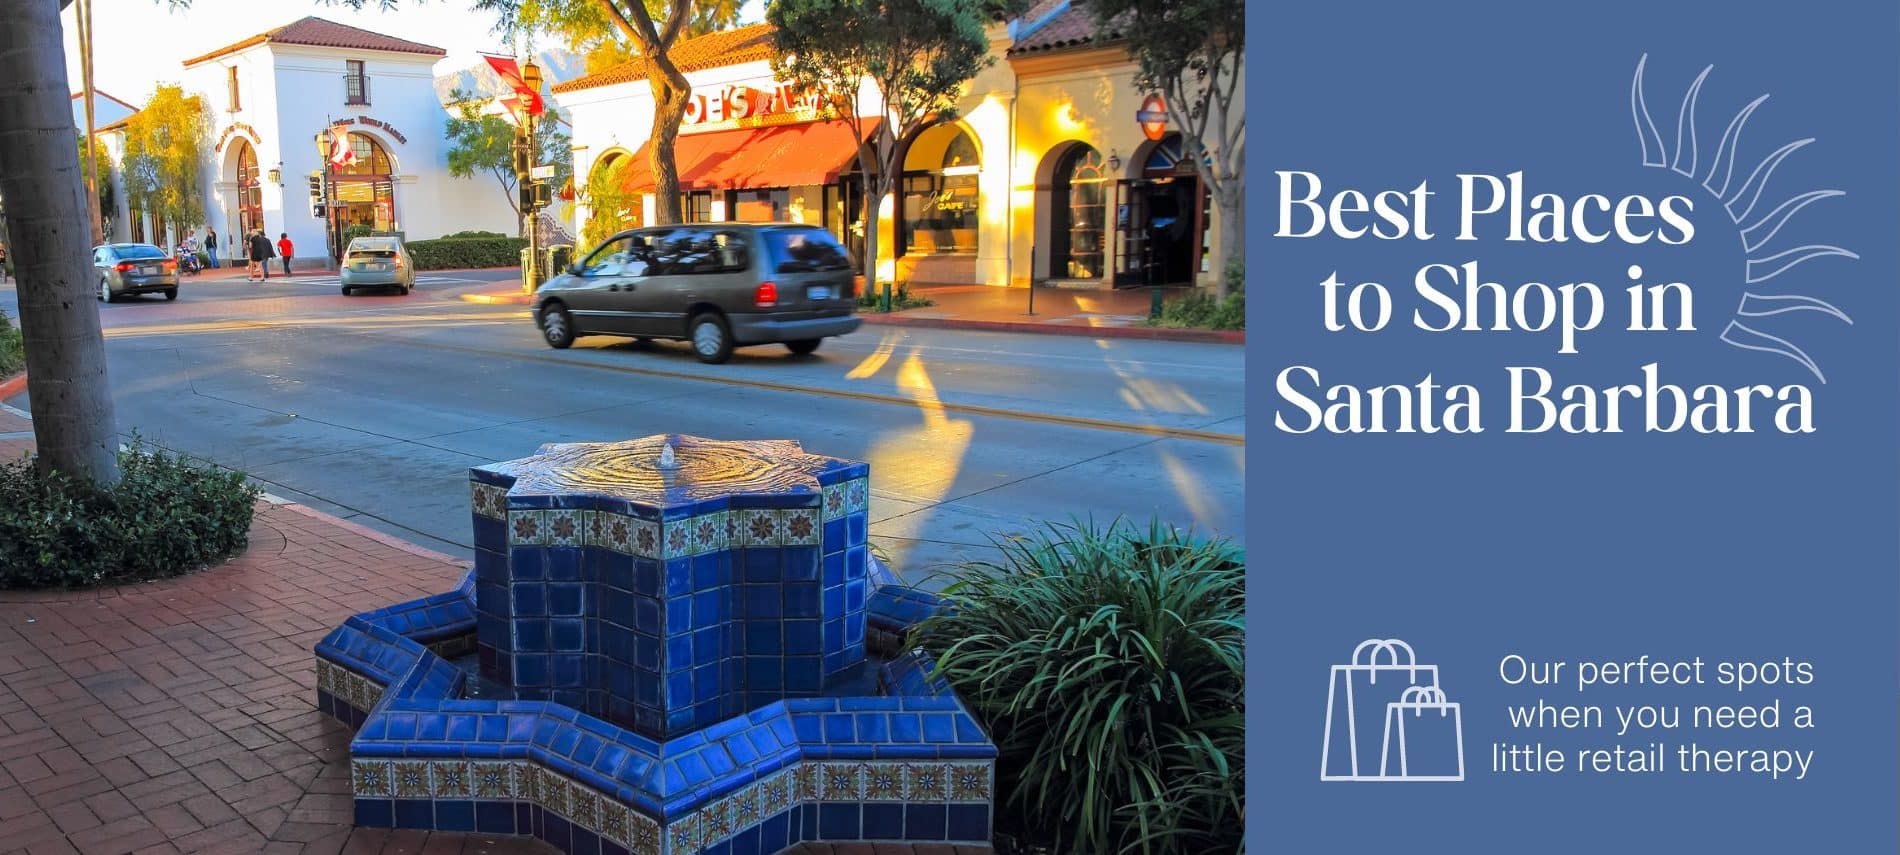 A busy street in Santa Barbara with shops and a bubbling fountain in the foreground. The text says, “Best Places to Shop in Santa Barbara. Our perfect spots when you need a little retail therapy.”